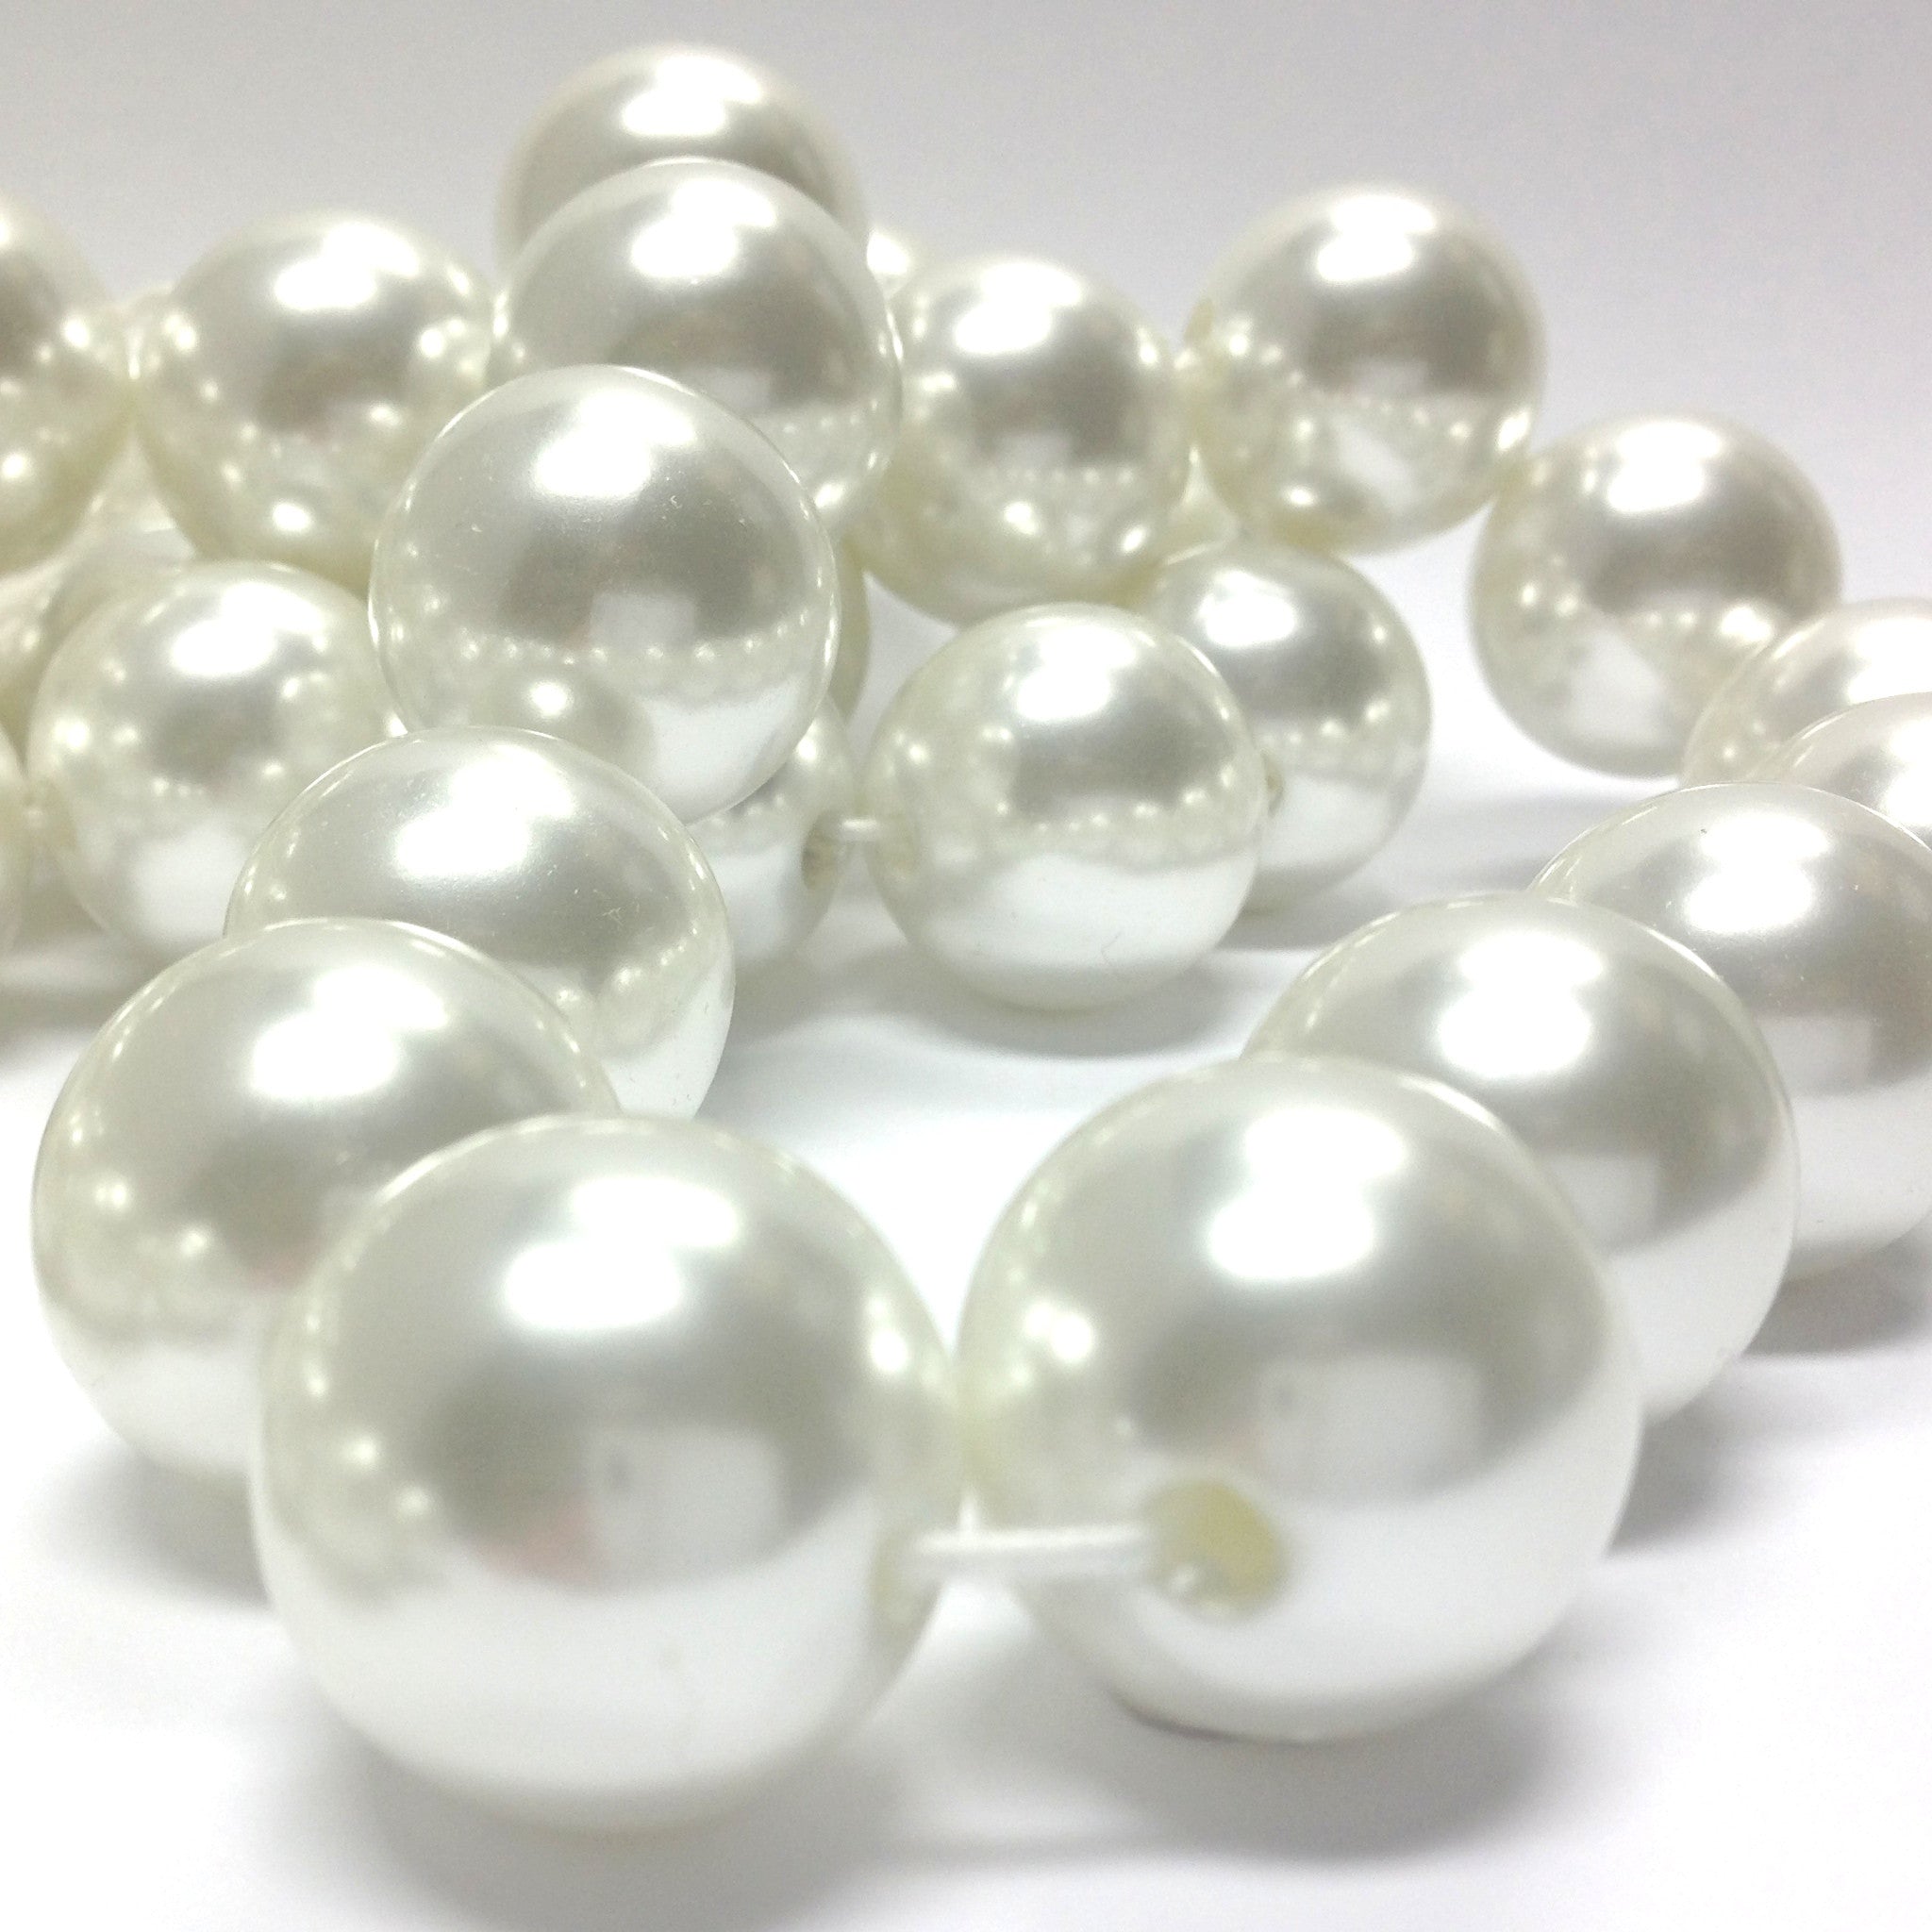 200 TOP QUALITY WHITE MIXED SIZE ROUND GLASS PEARL BEADS 4mm 6mm 8mm 1 –  The Bead Selection